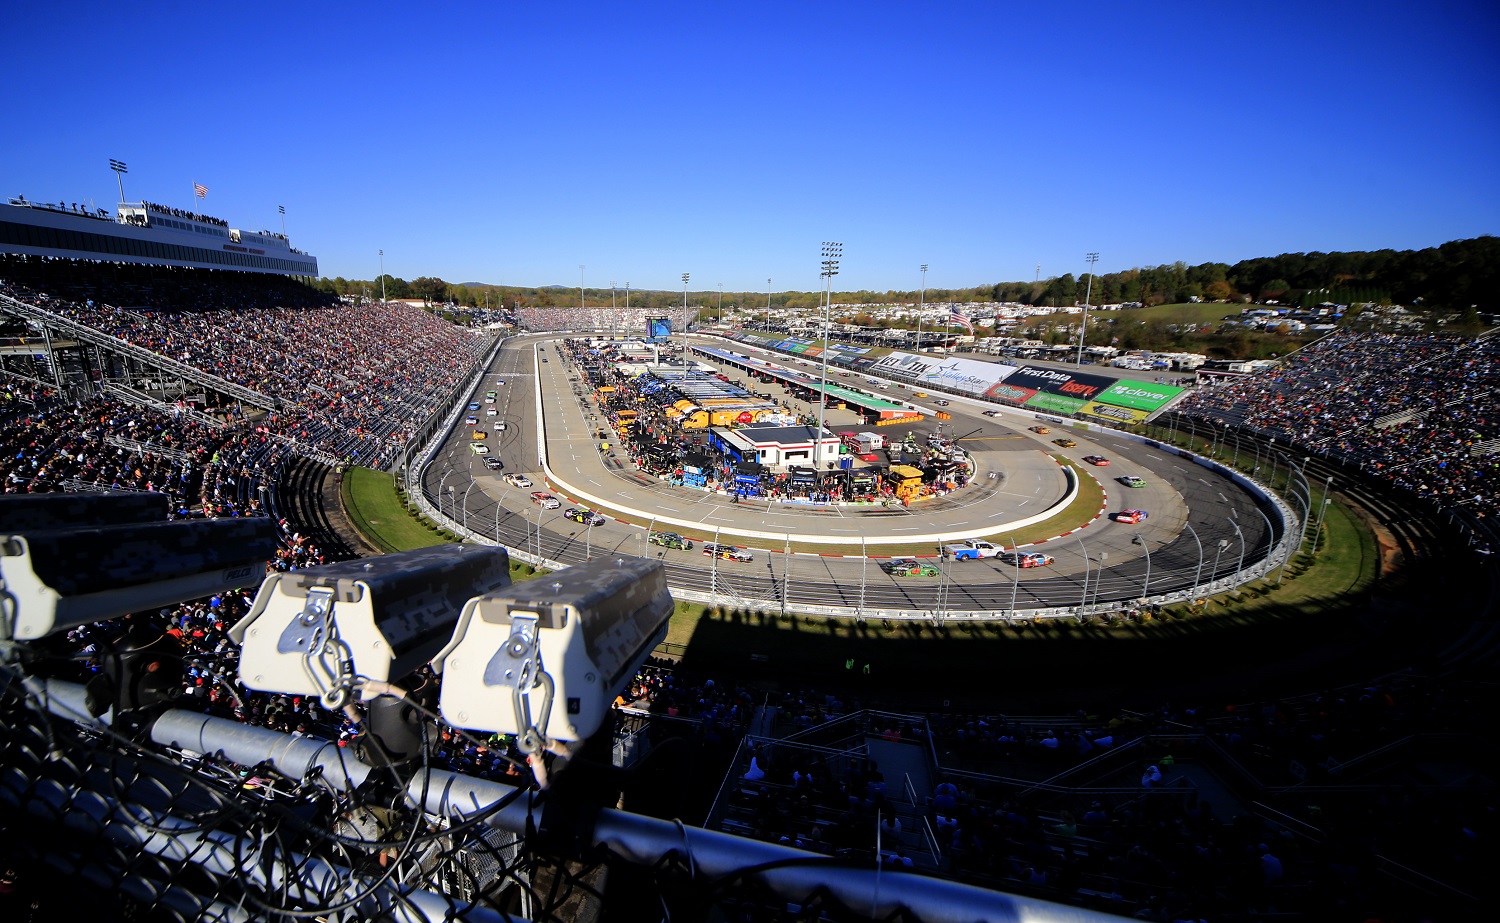 An overhead view of Martinsville Speedway during the running of the First Data 500 on Oct. 27, 2019, at Martinsville Speedway in Martinsville, Va.